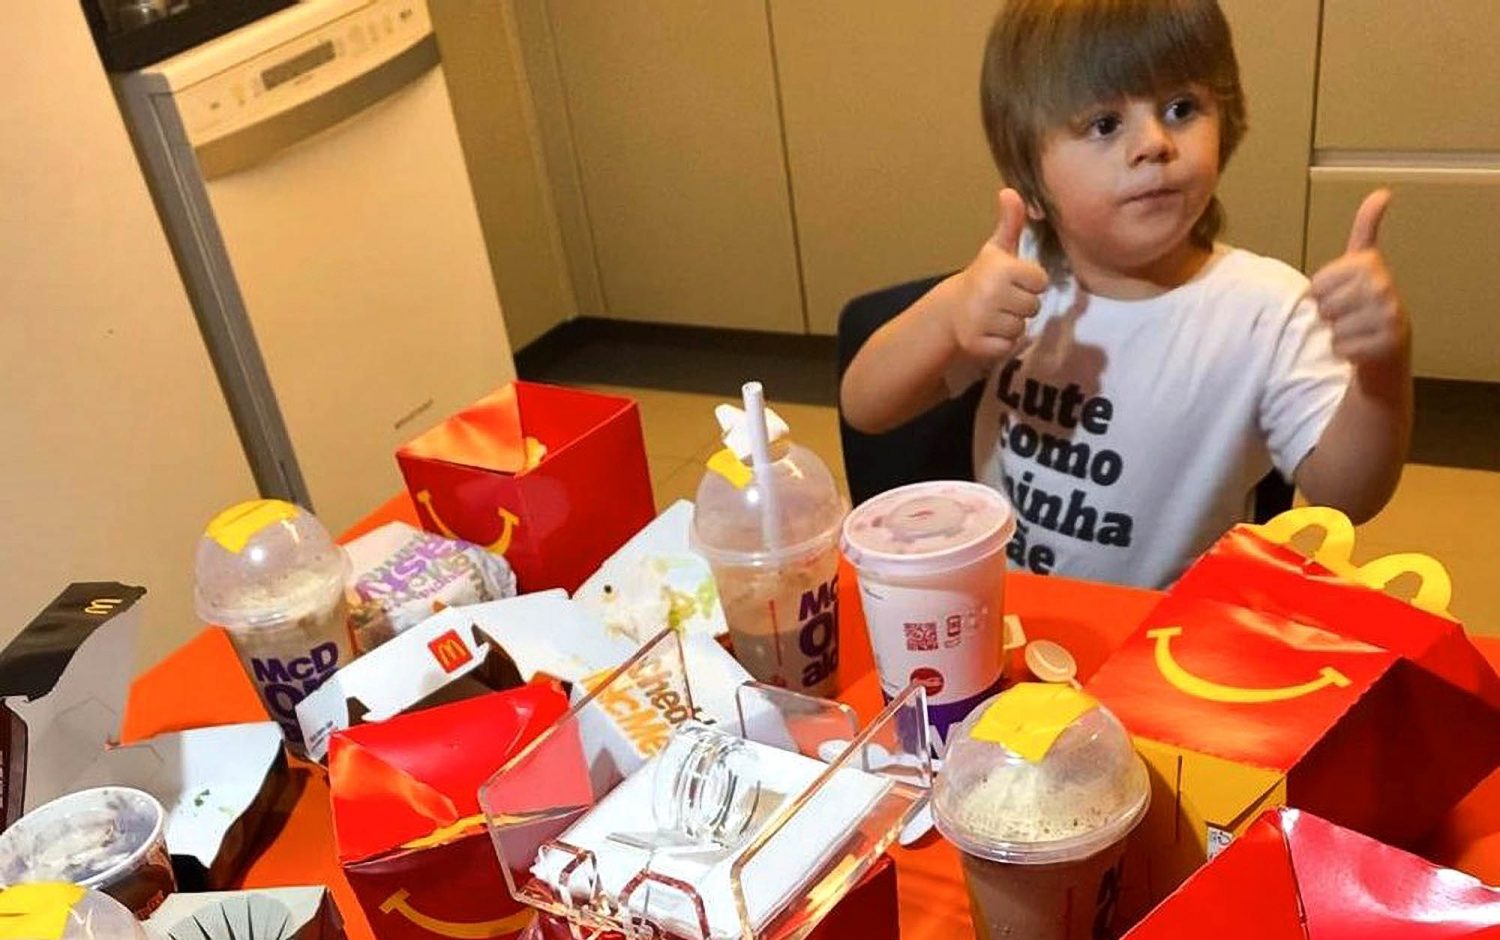 hungry three-year-old orders huge mcdonald’s feast with mum’s phone